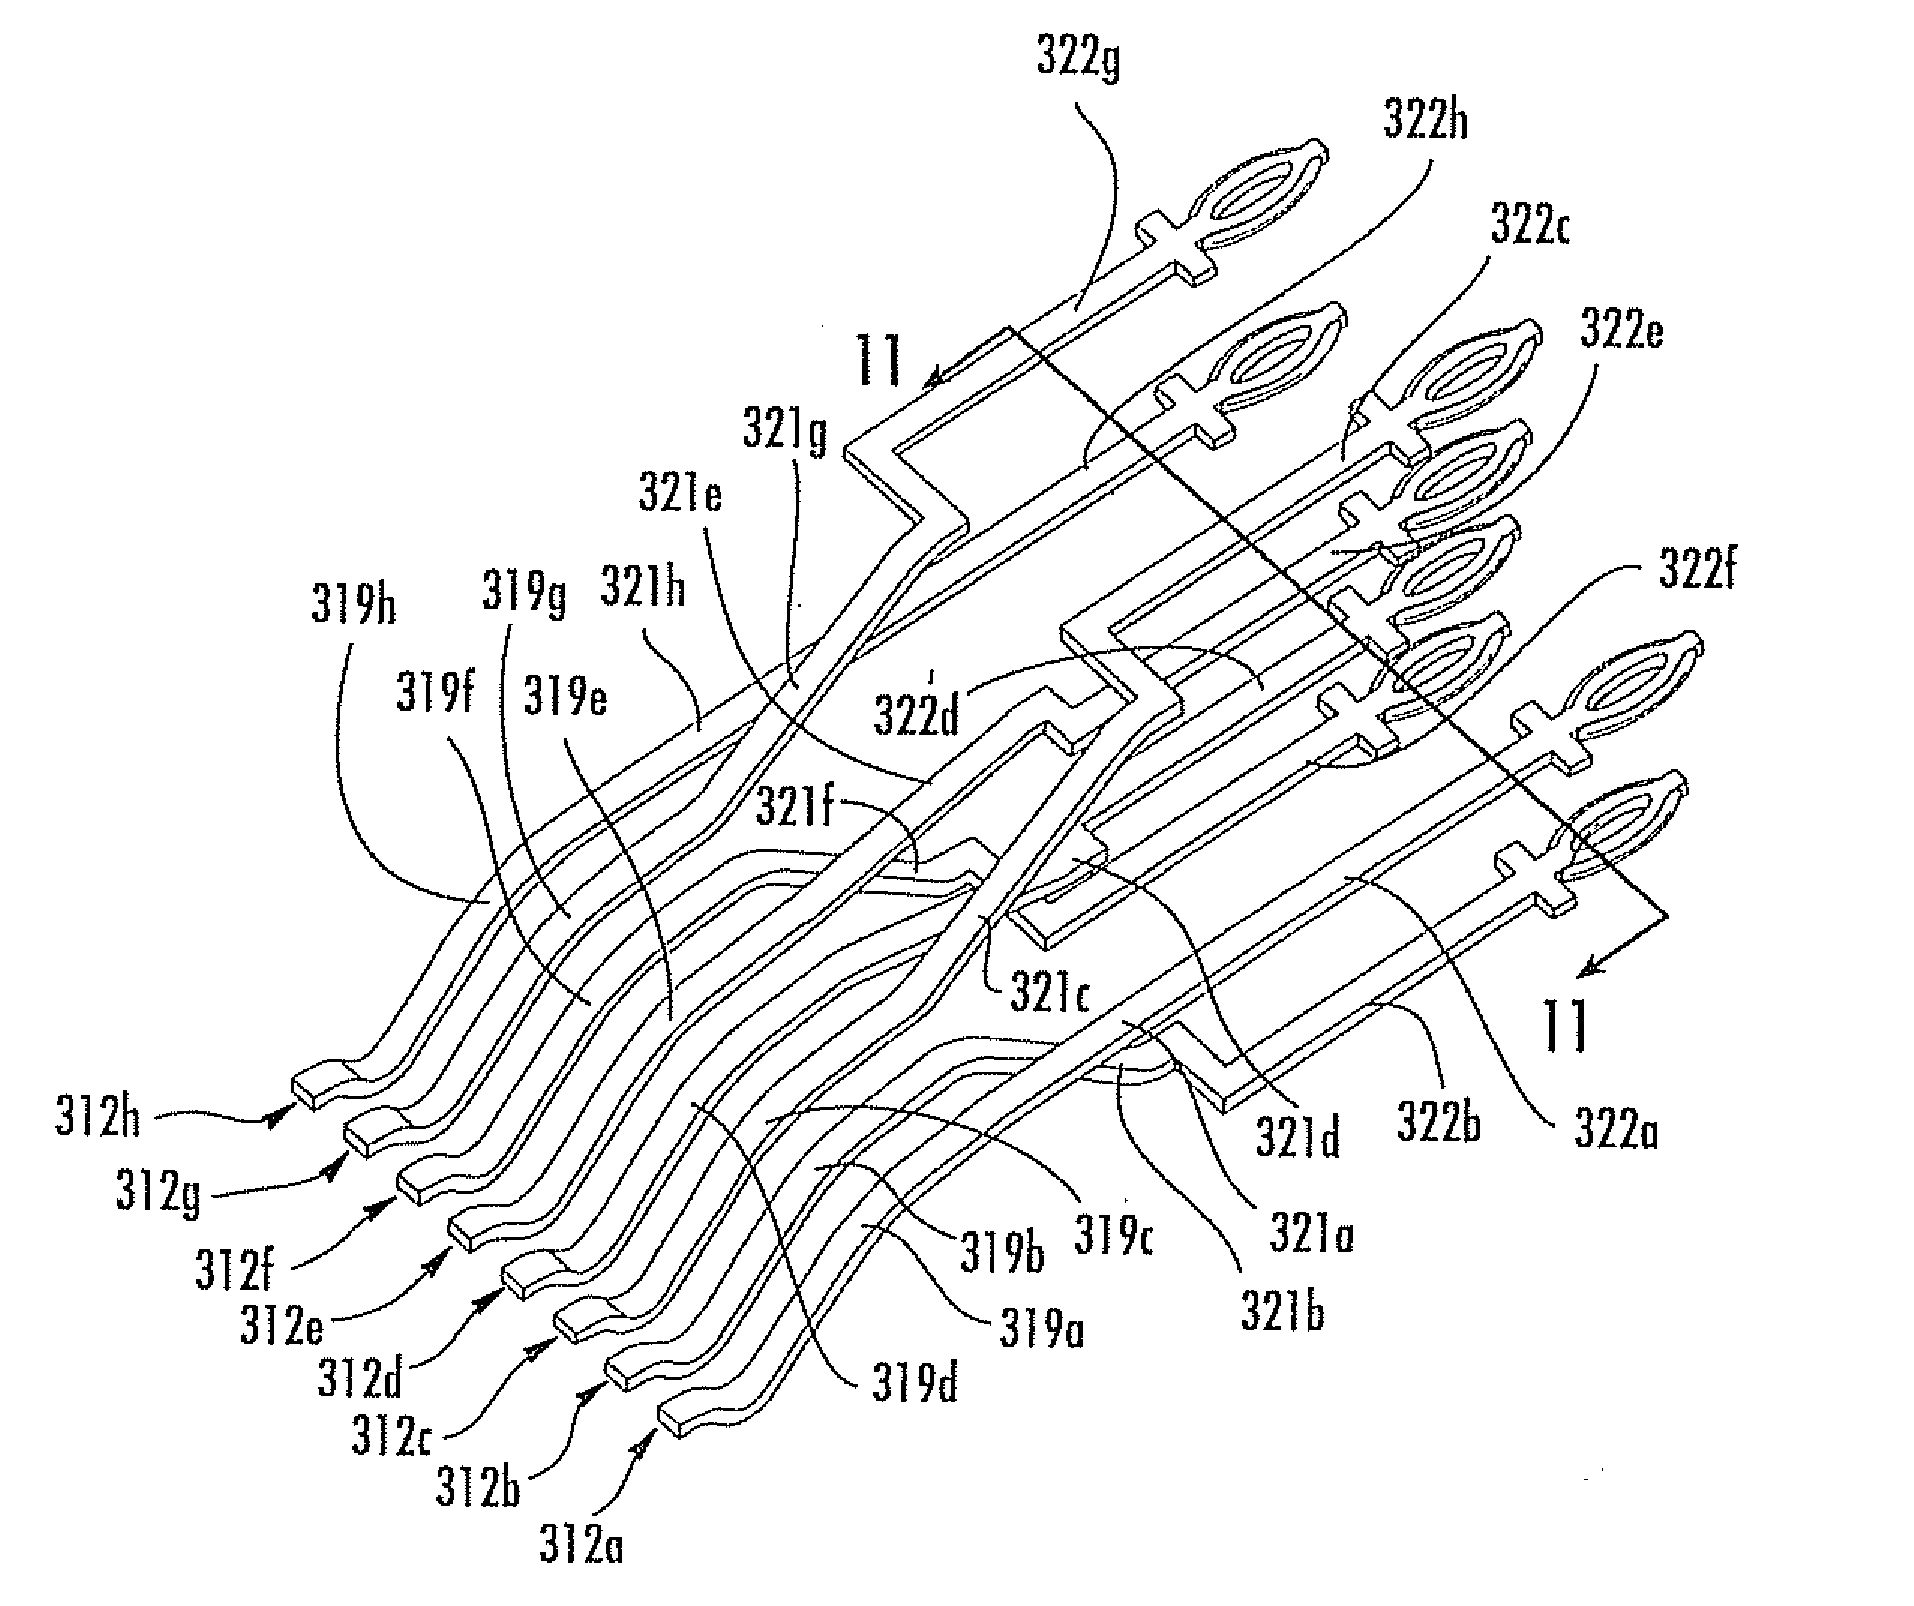 Communications connector with leadframe contact wires that compensate differential to common mode crosstalk